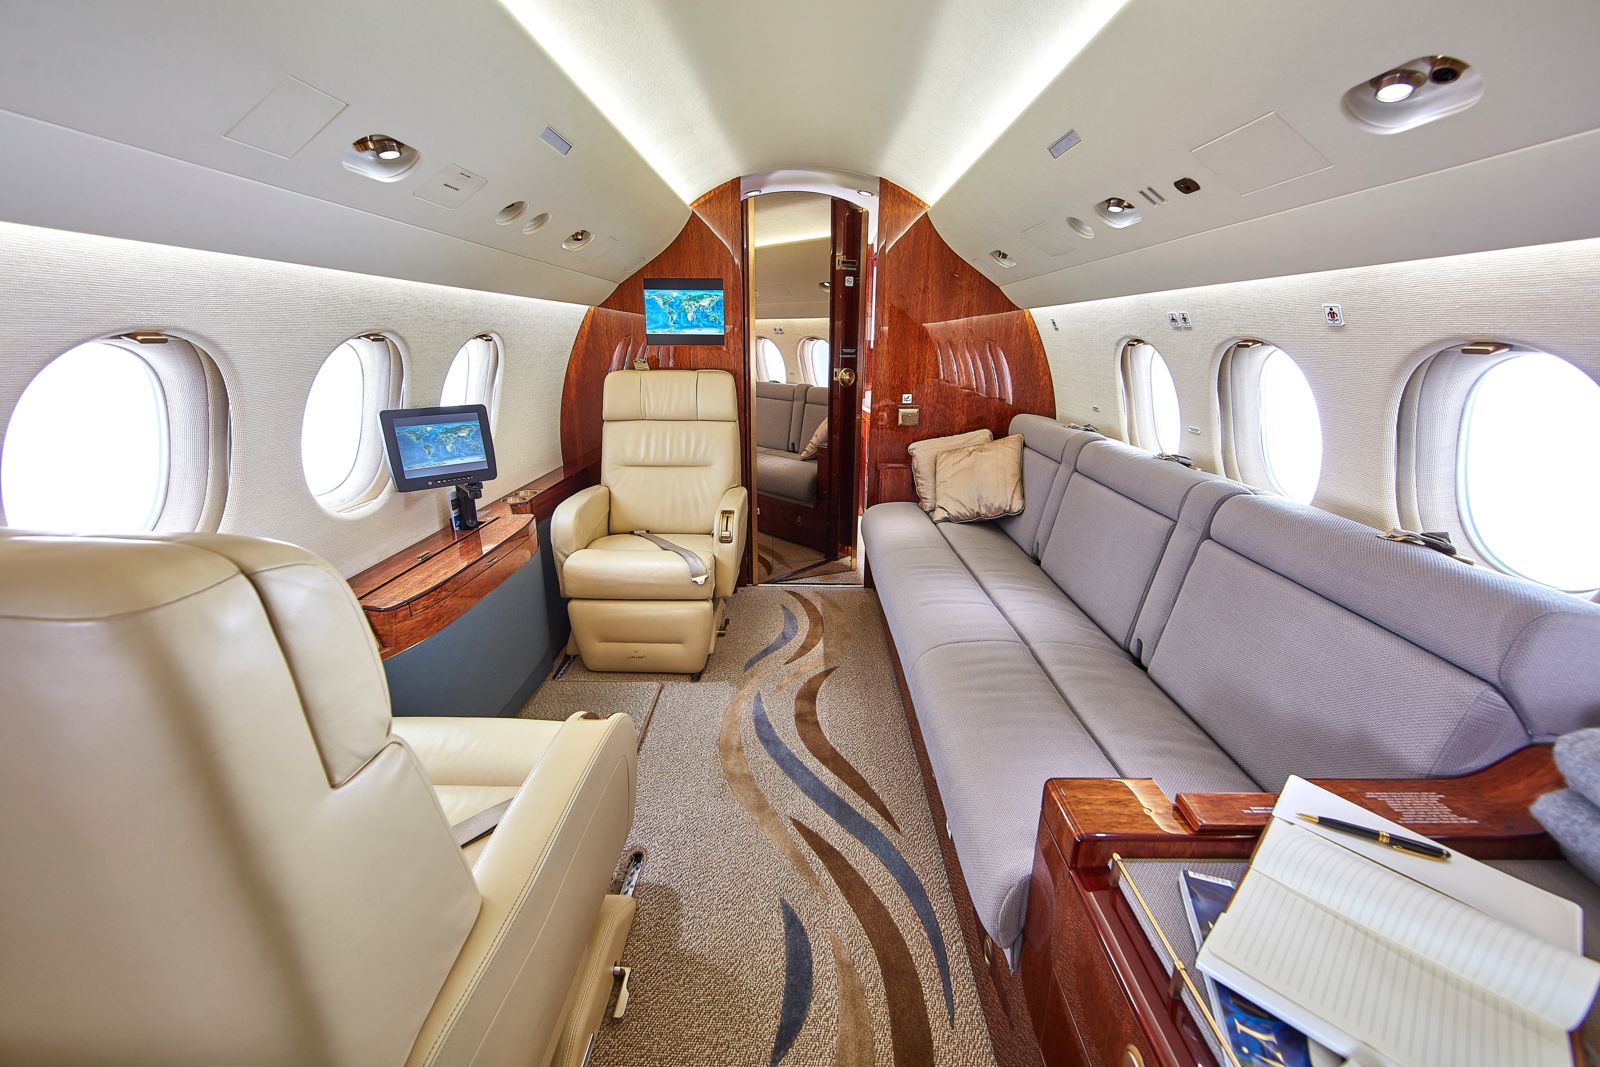 Dassault Falcon 7X  S/N 83 for sale | gallery image: /userfiles/images/F7X_sn58/aft%20cabin.jpg